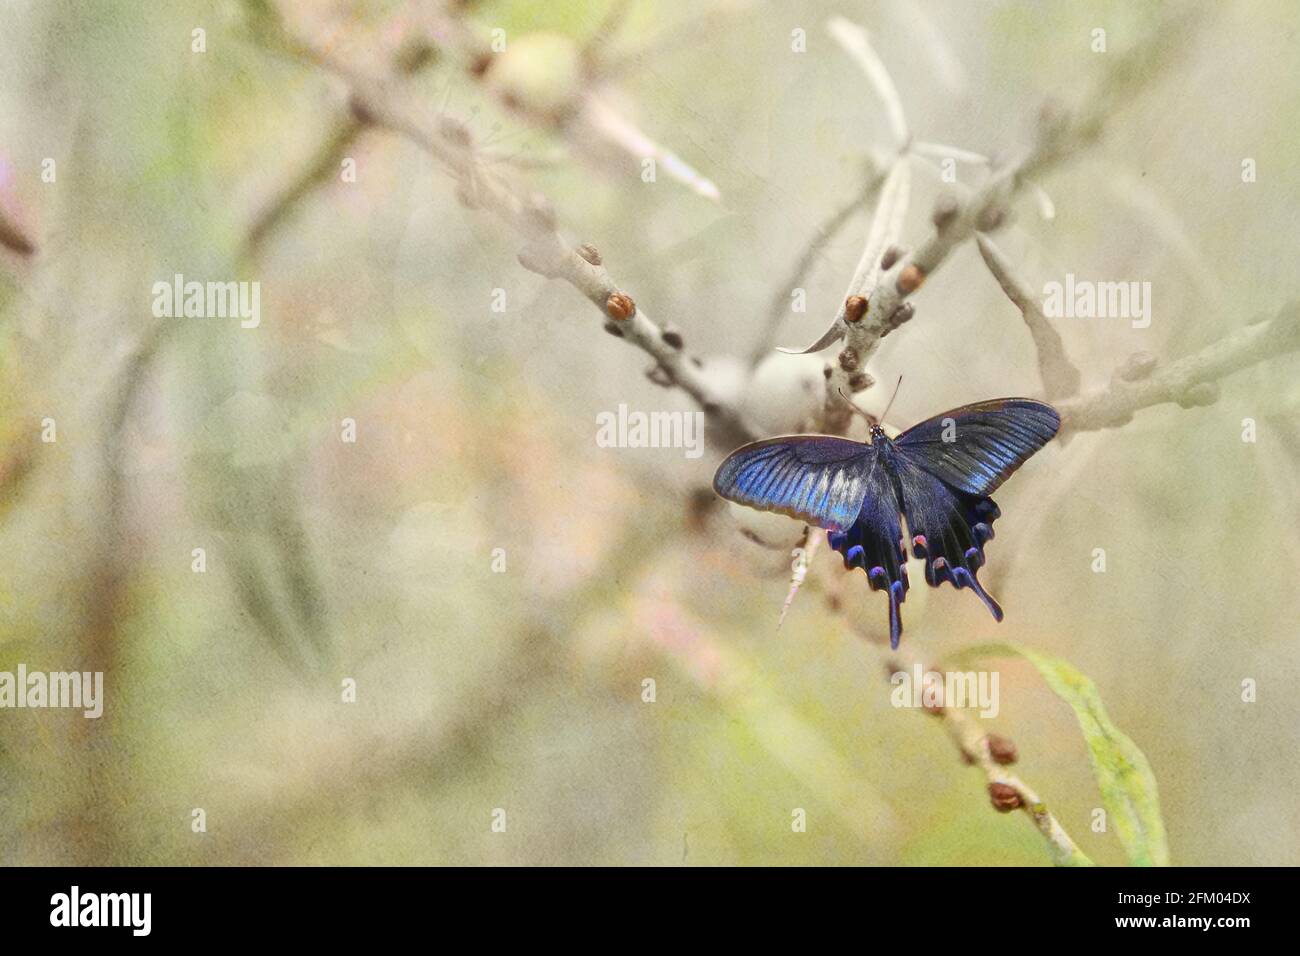 A blue butterfly on a light pastel background on a spring day. Stock Photo